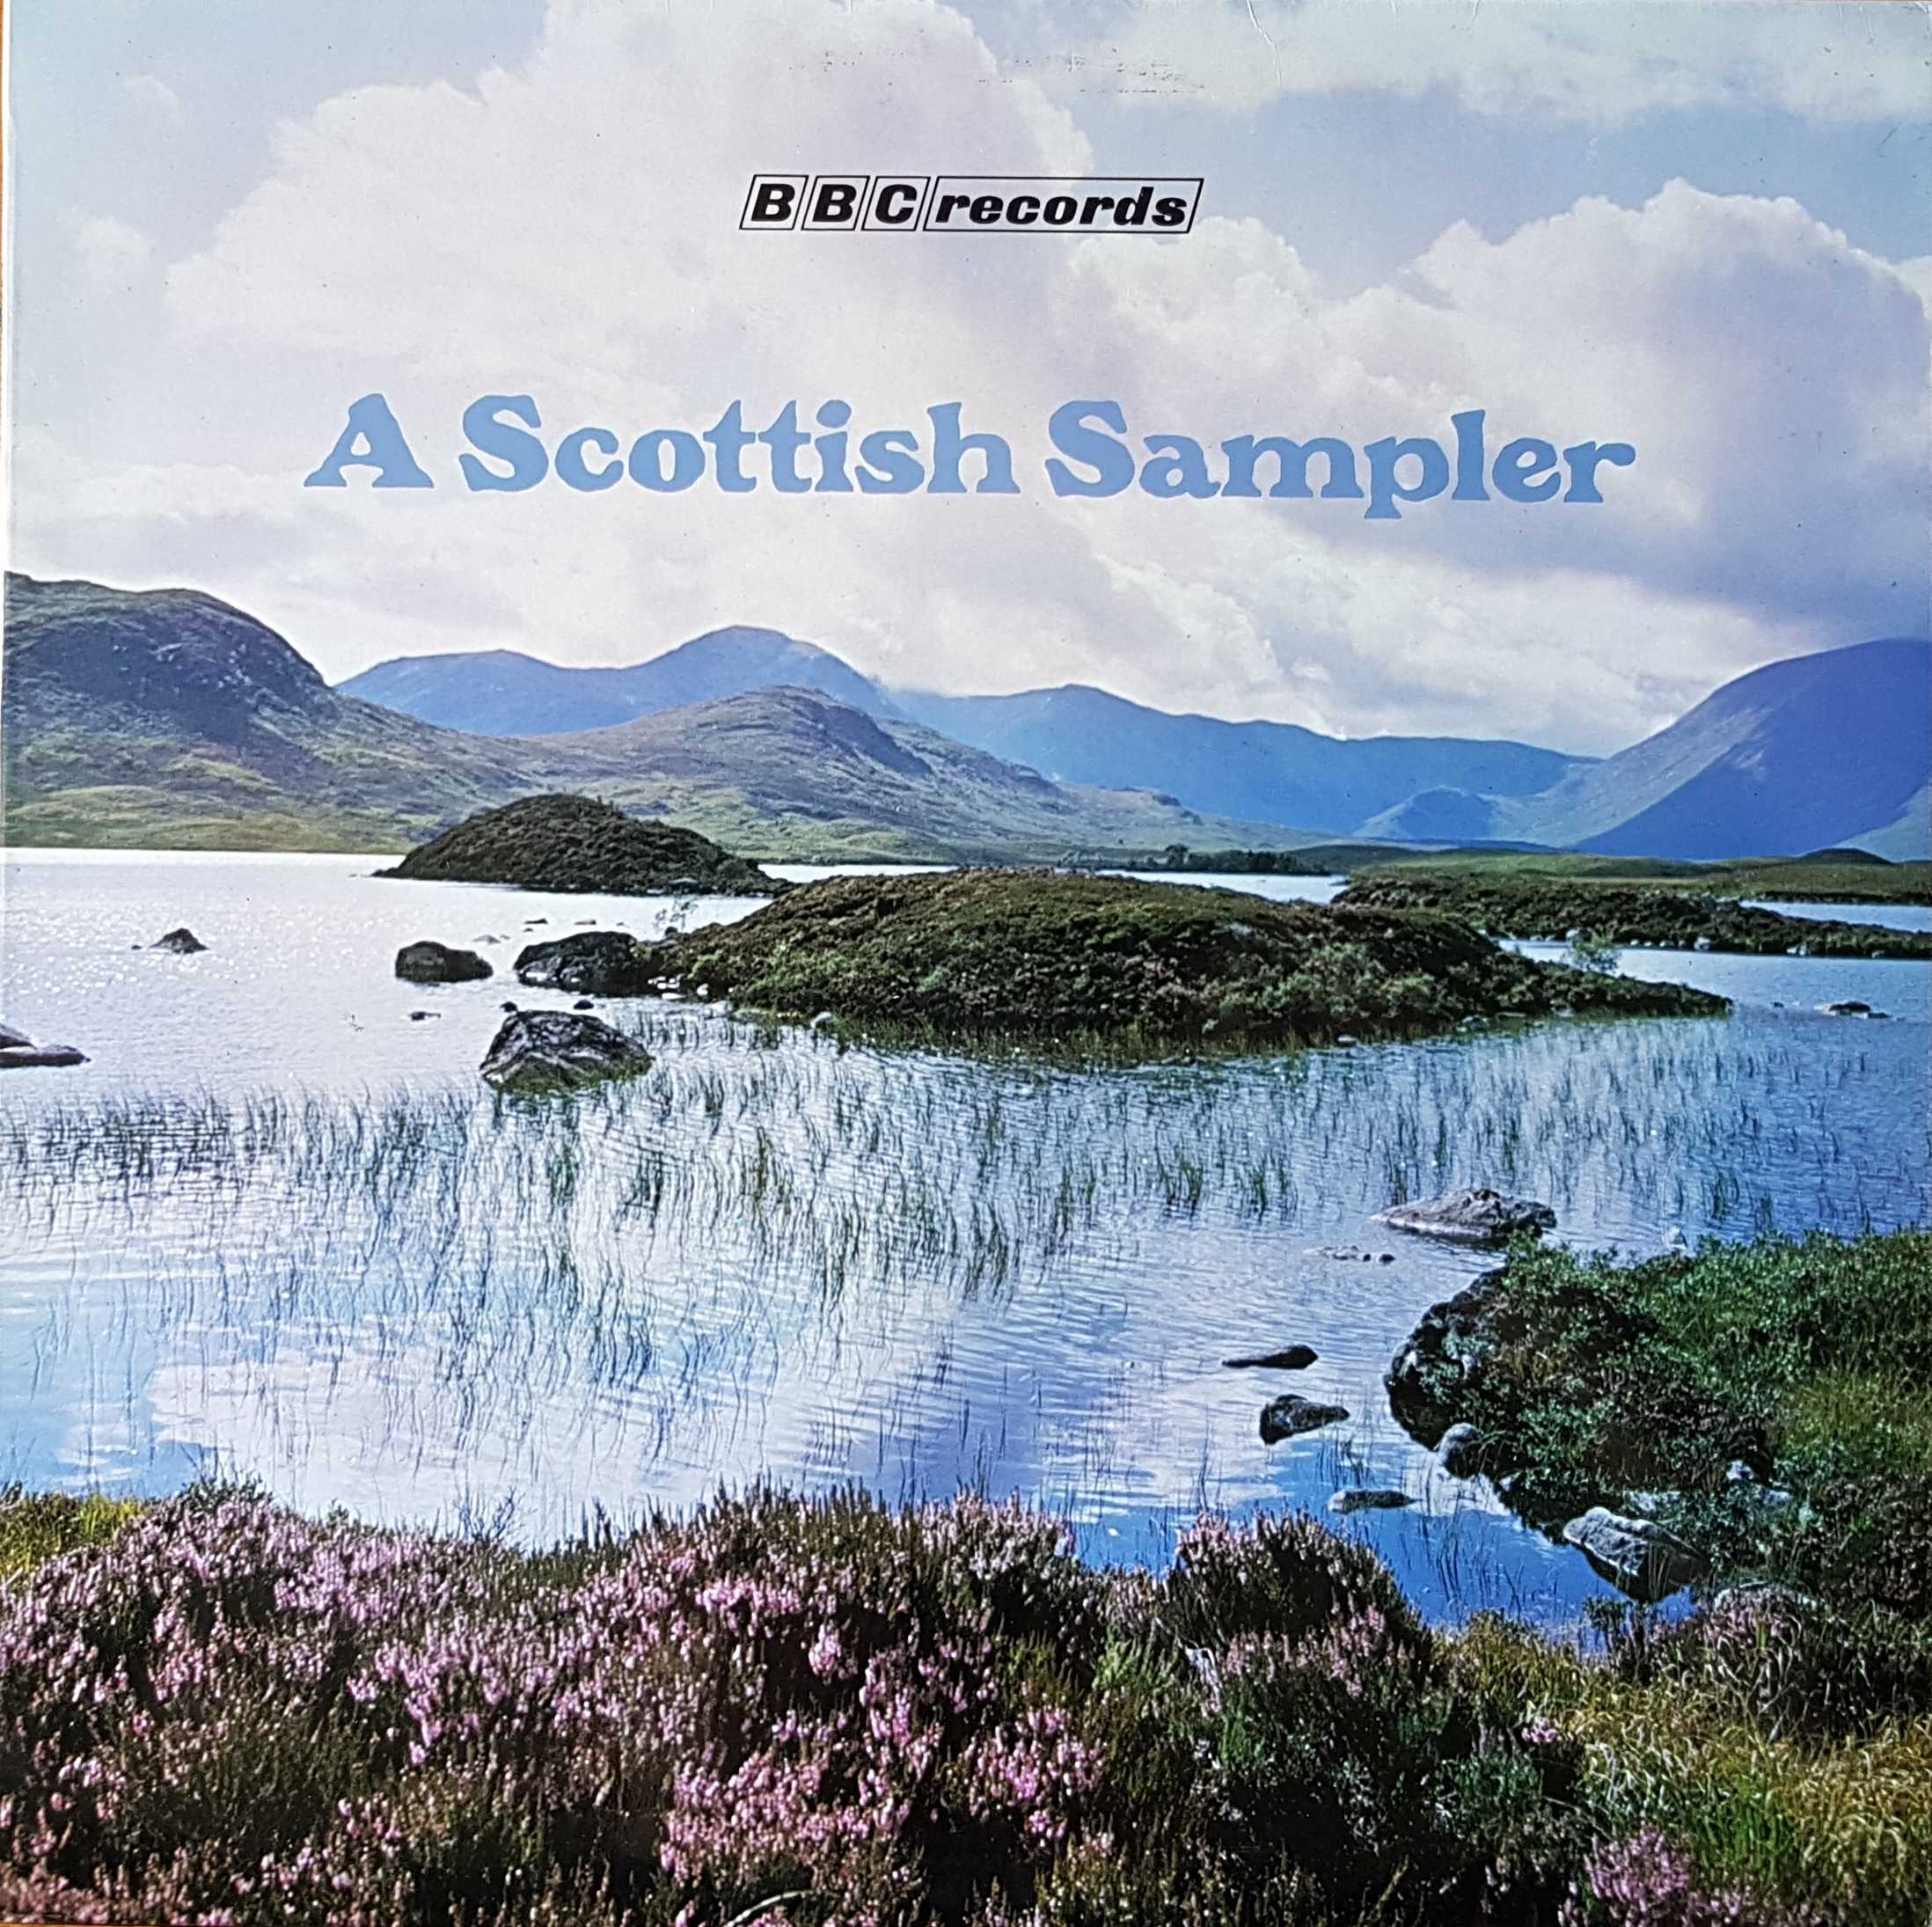 Picture of REC 125 Scottish sampler by artist Eoin Hamilton from the BBC albums - Records and Tapes library